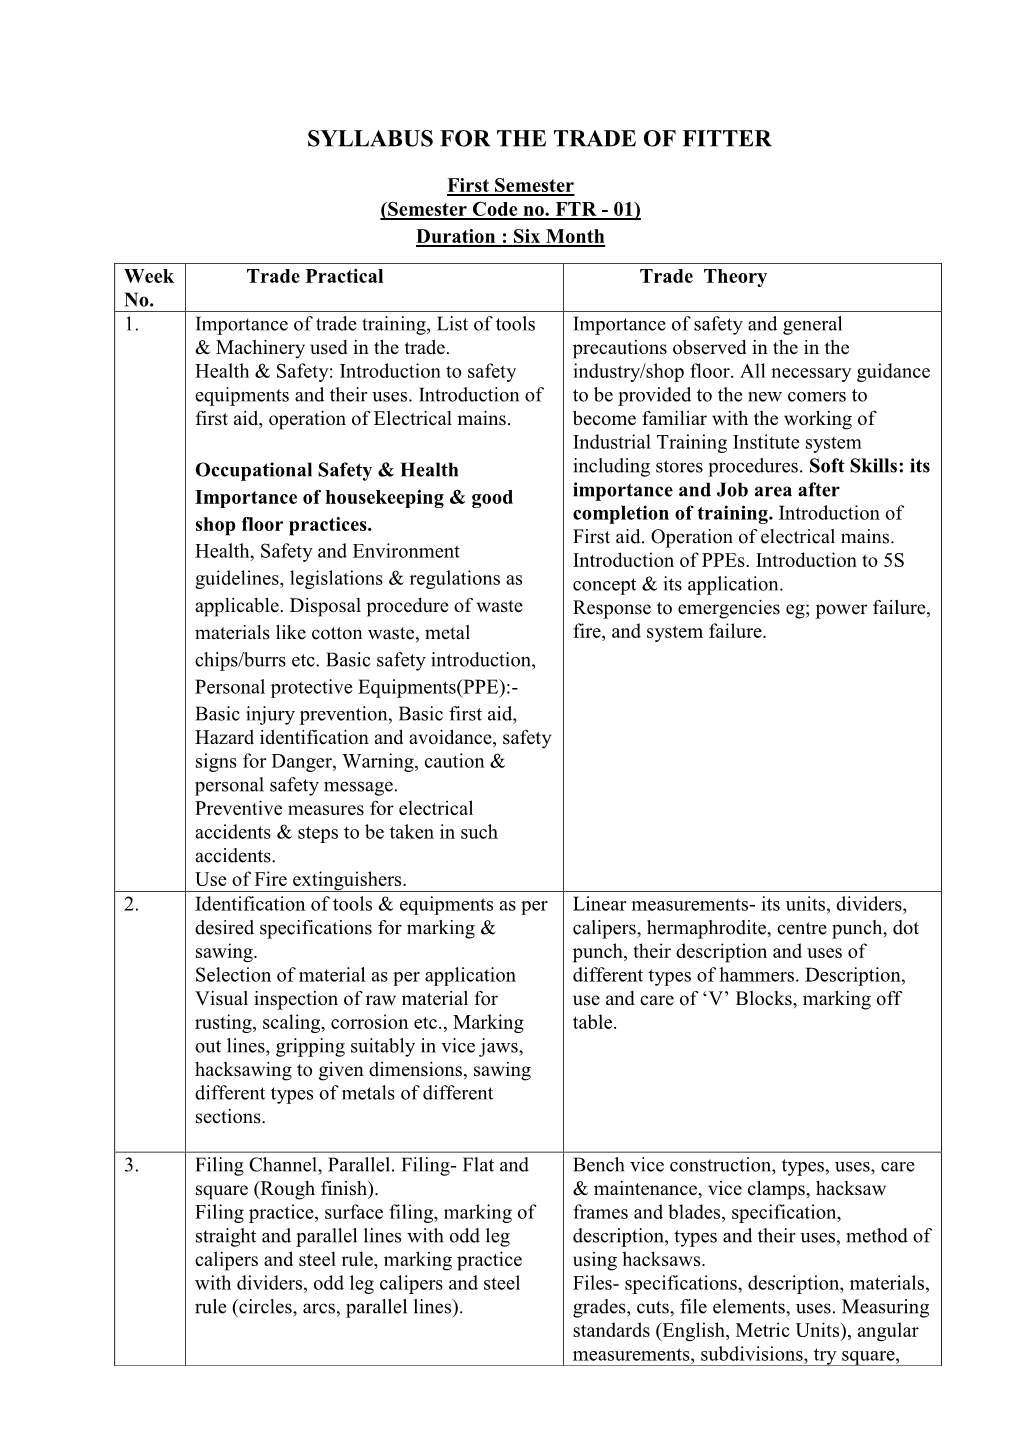 Syllabus for the Trade of Fitter